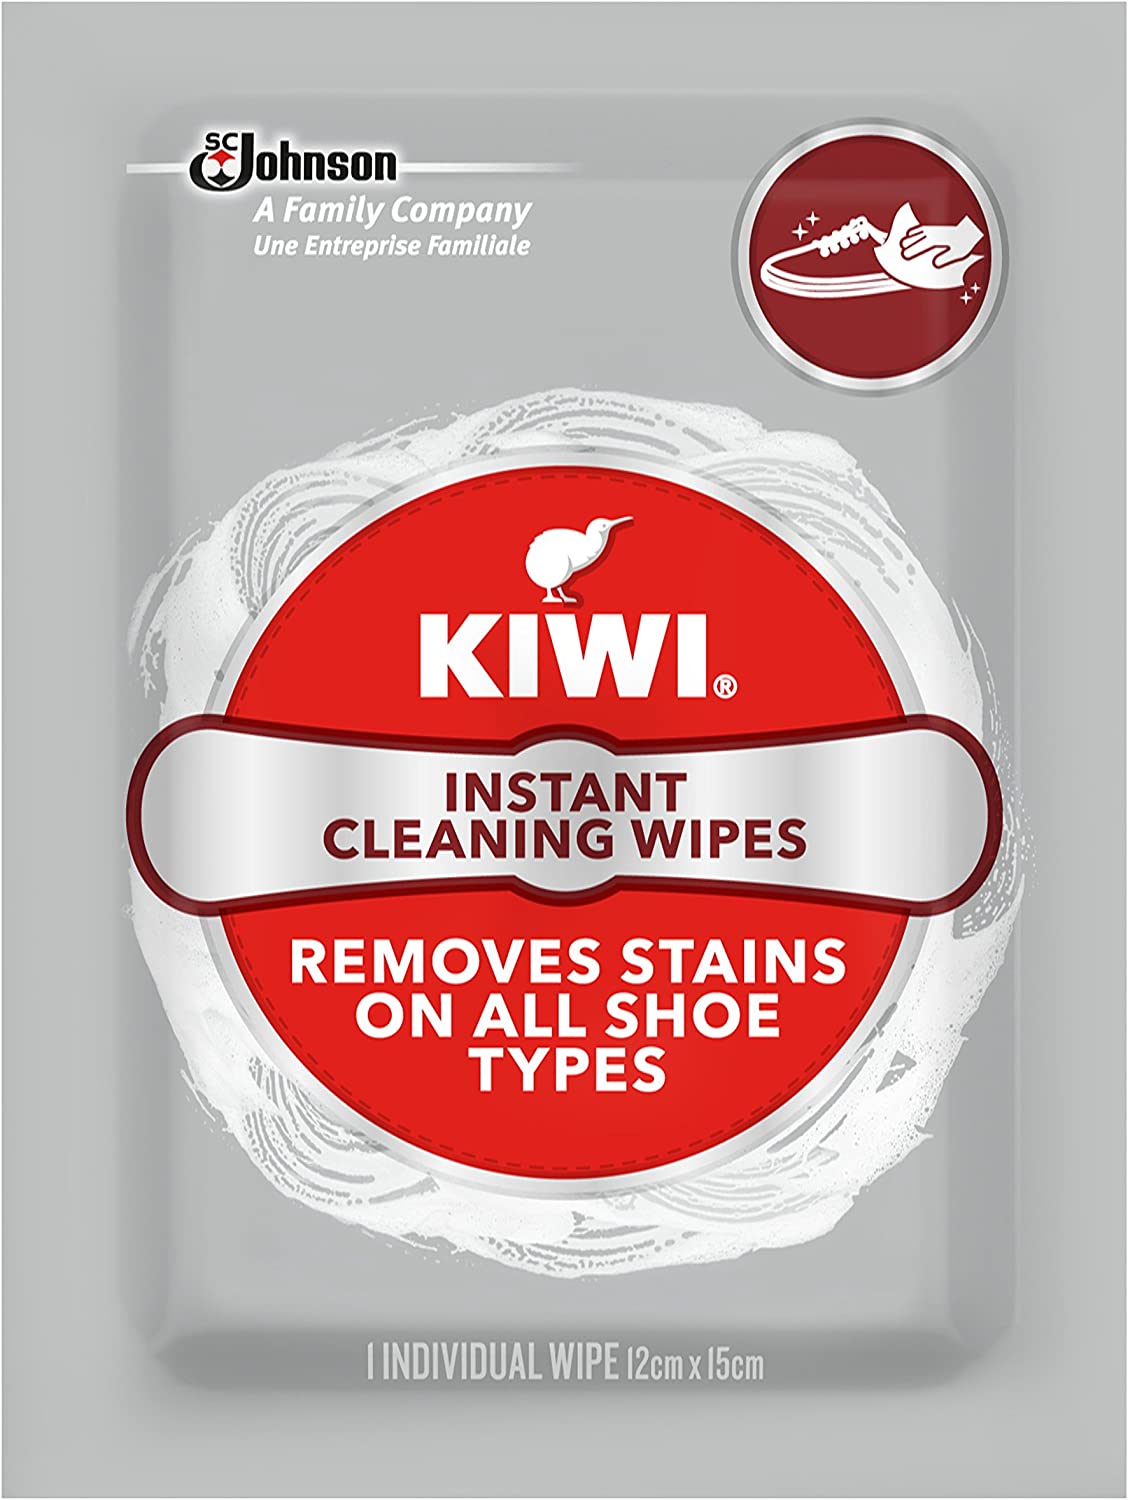 Kiwi Instant Shoe Cleaning Wipes for All Shoe Types, Pack of 4 - Army 1157 kit KIWI